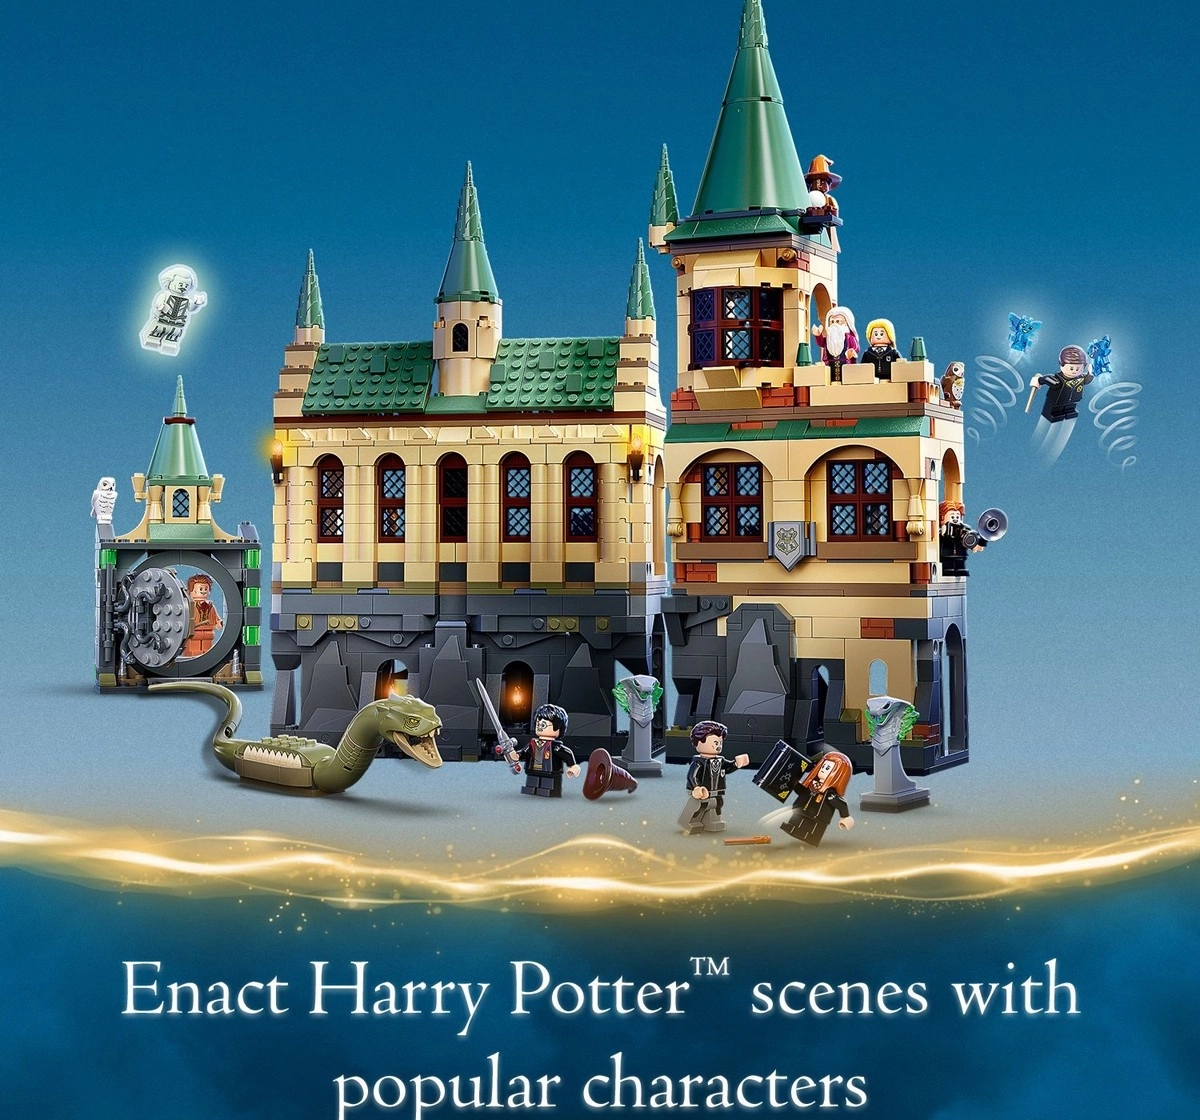 Harry Potter Hogwarts Puzzle Requires Sorting 3,000 Pieces